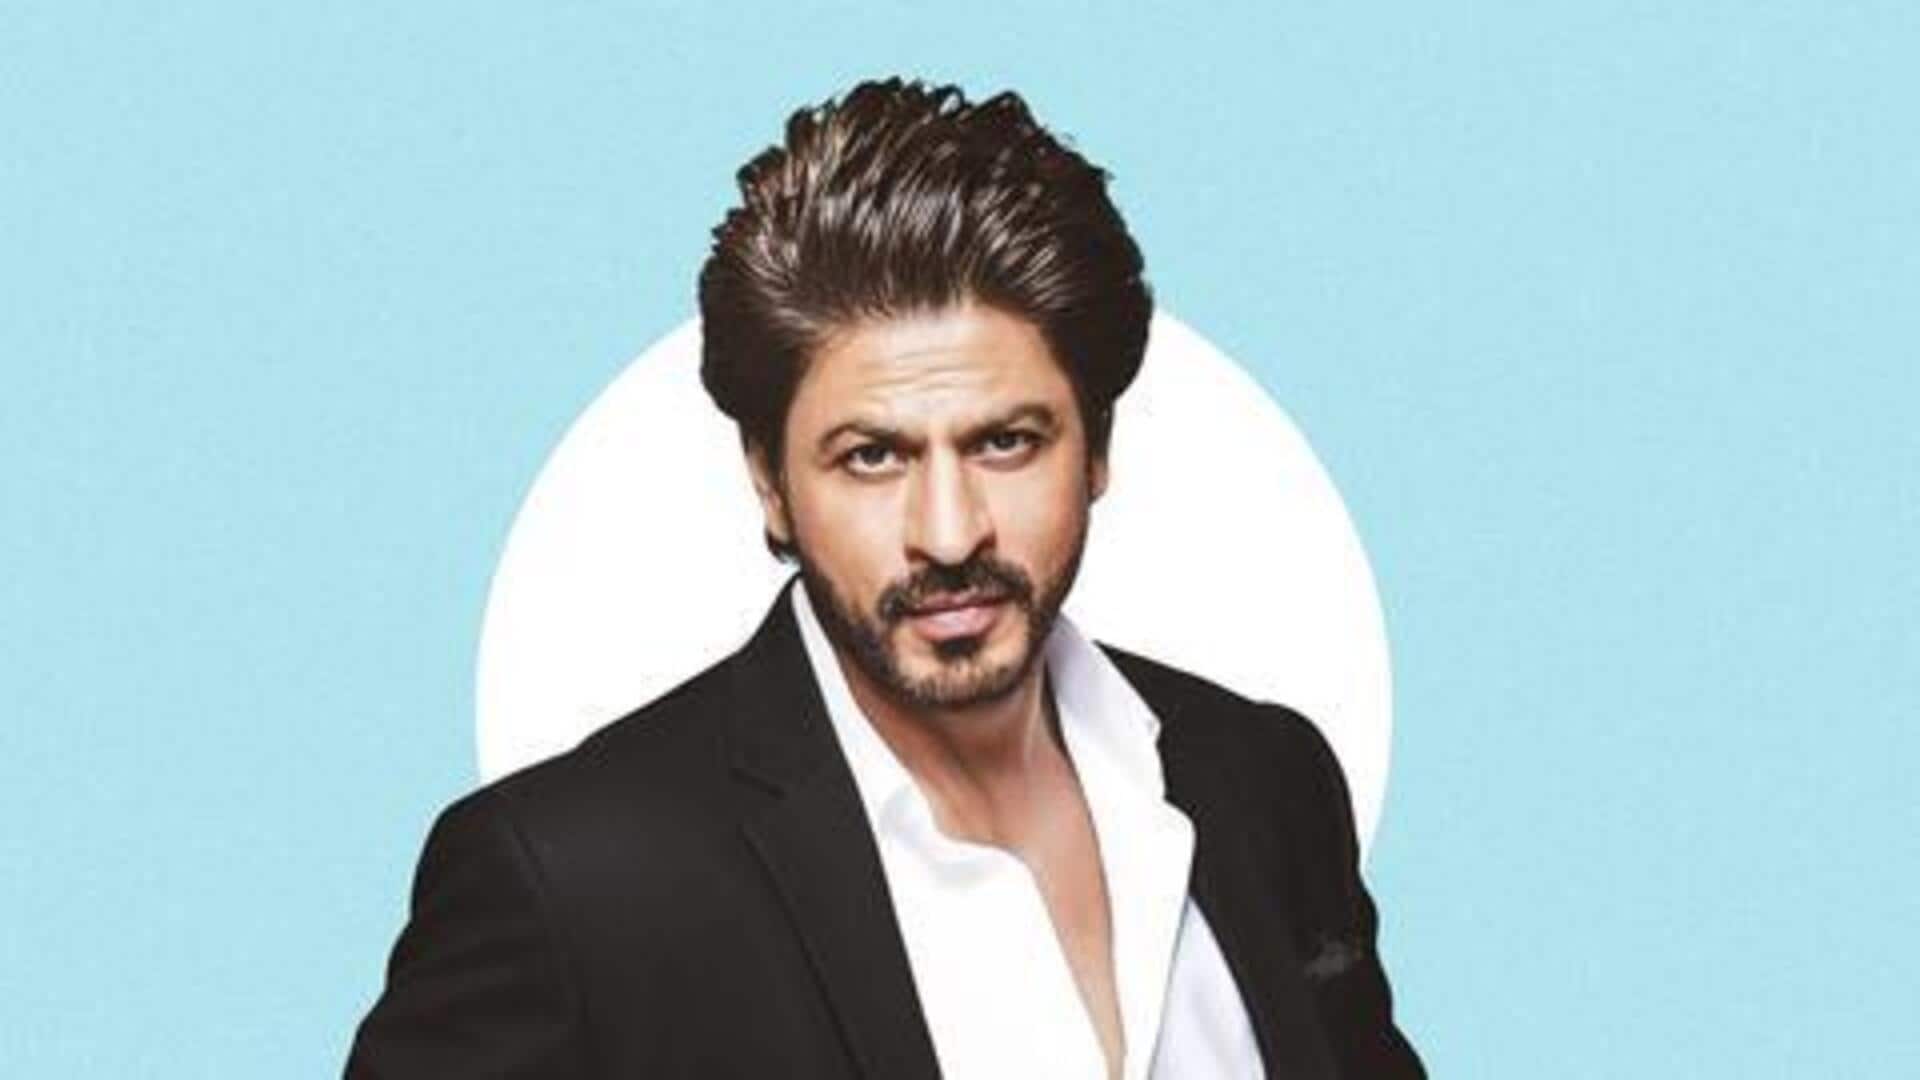 Has Shah Rukh Khan been offered 'Dhoom 4'? Find out